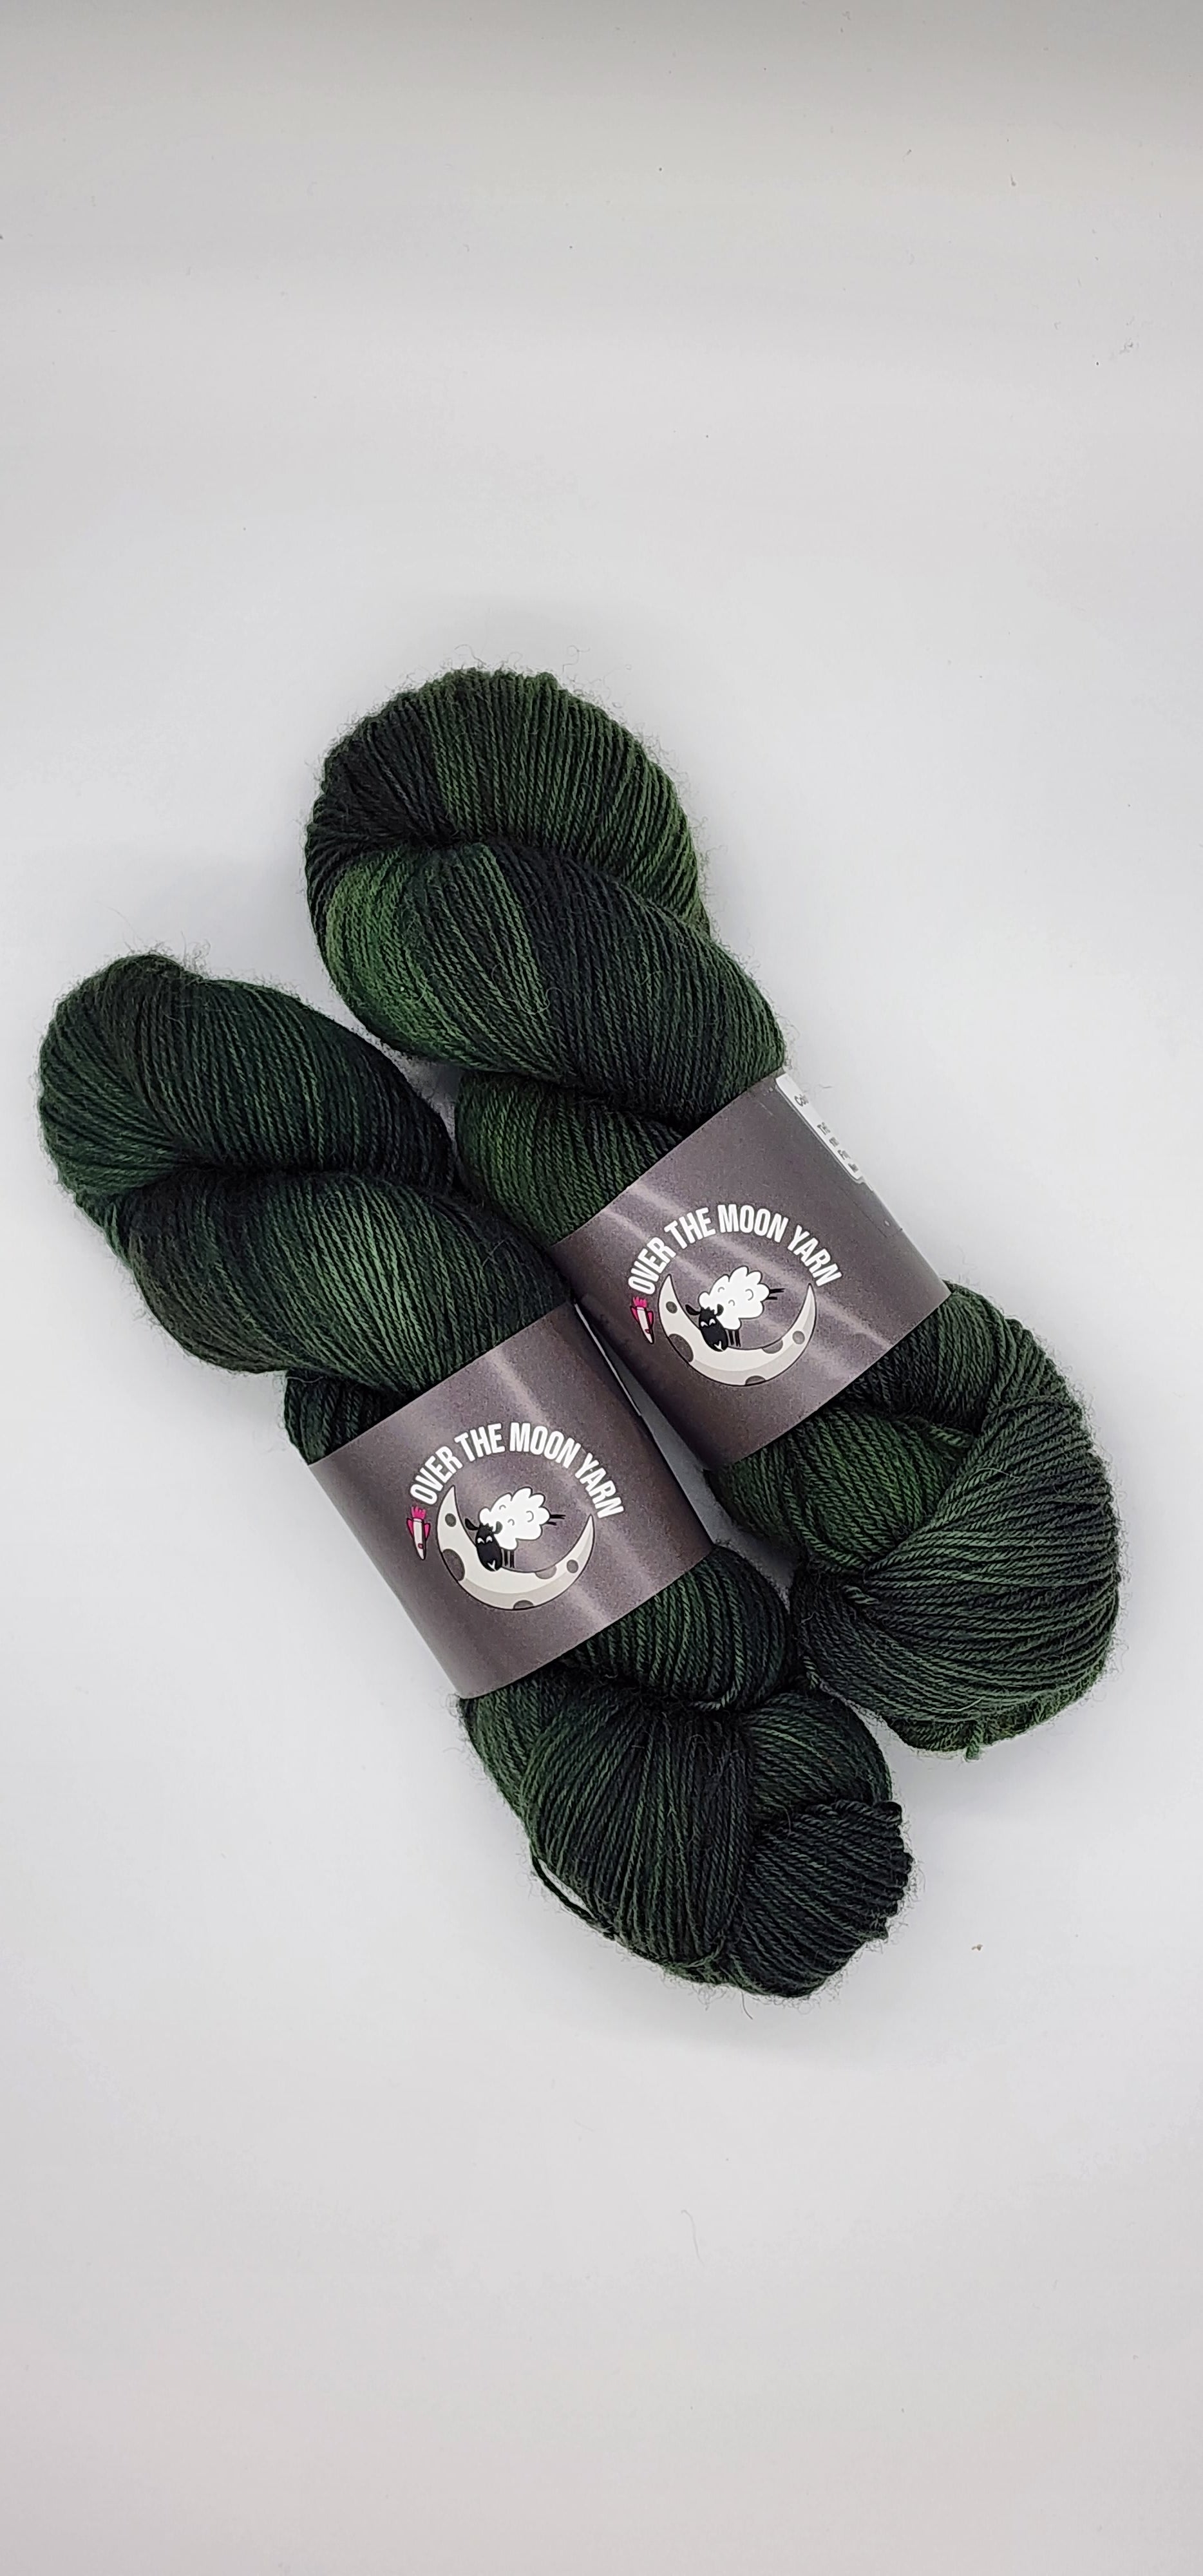 Evergreen, Thermonuclear 100% BFL Fingering, 100 grams, 437 yds